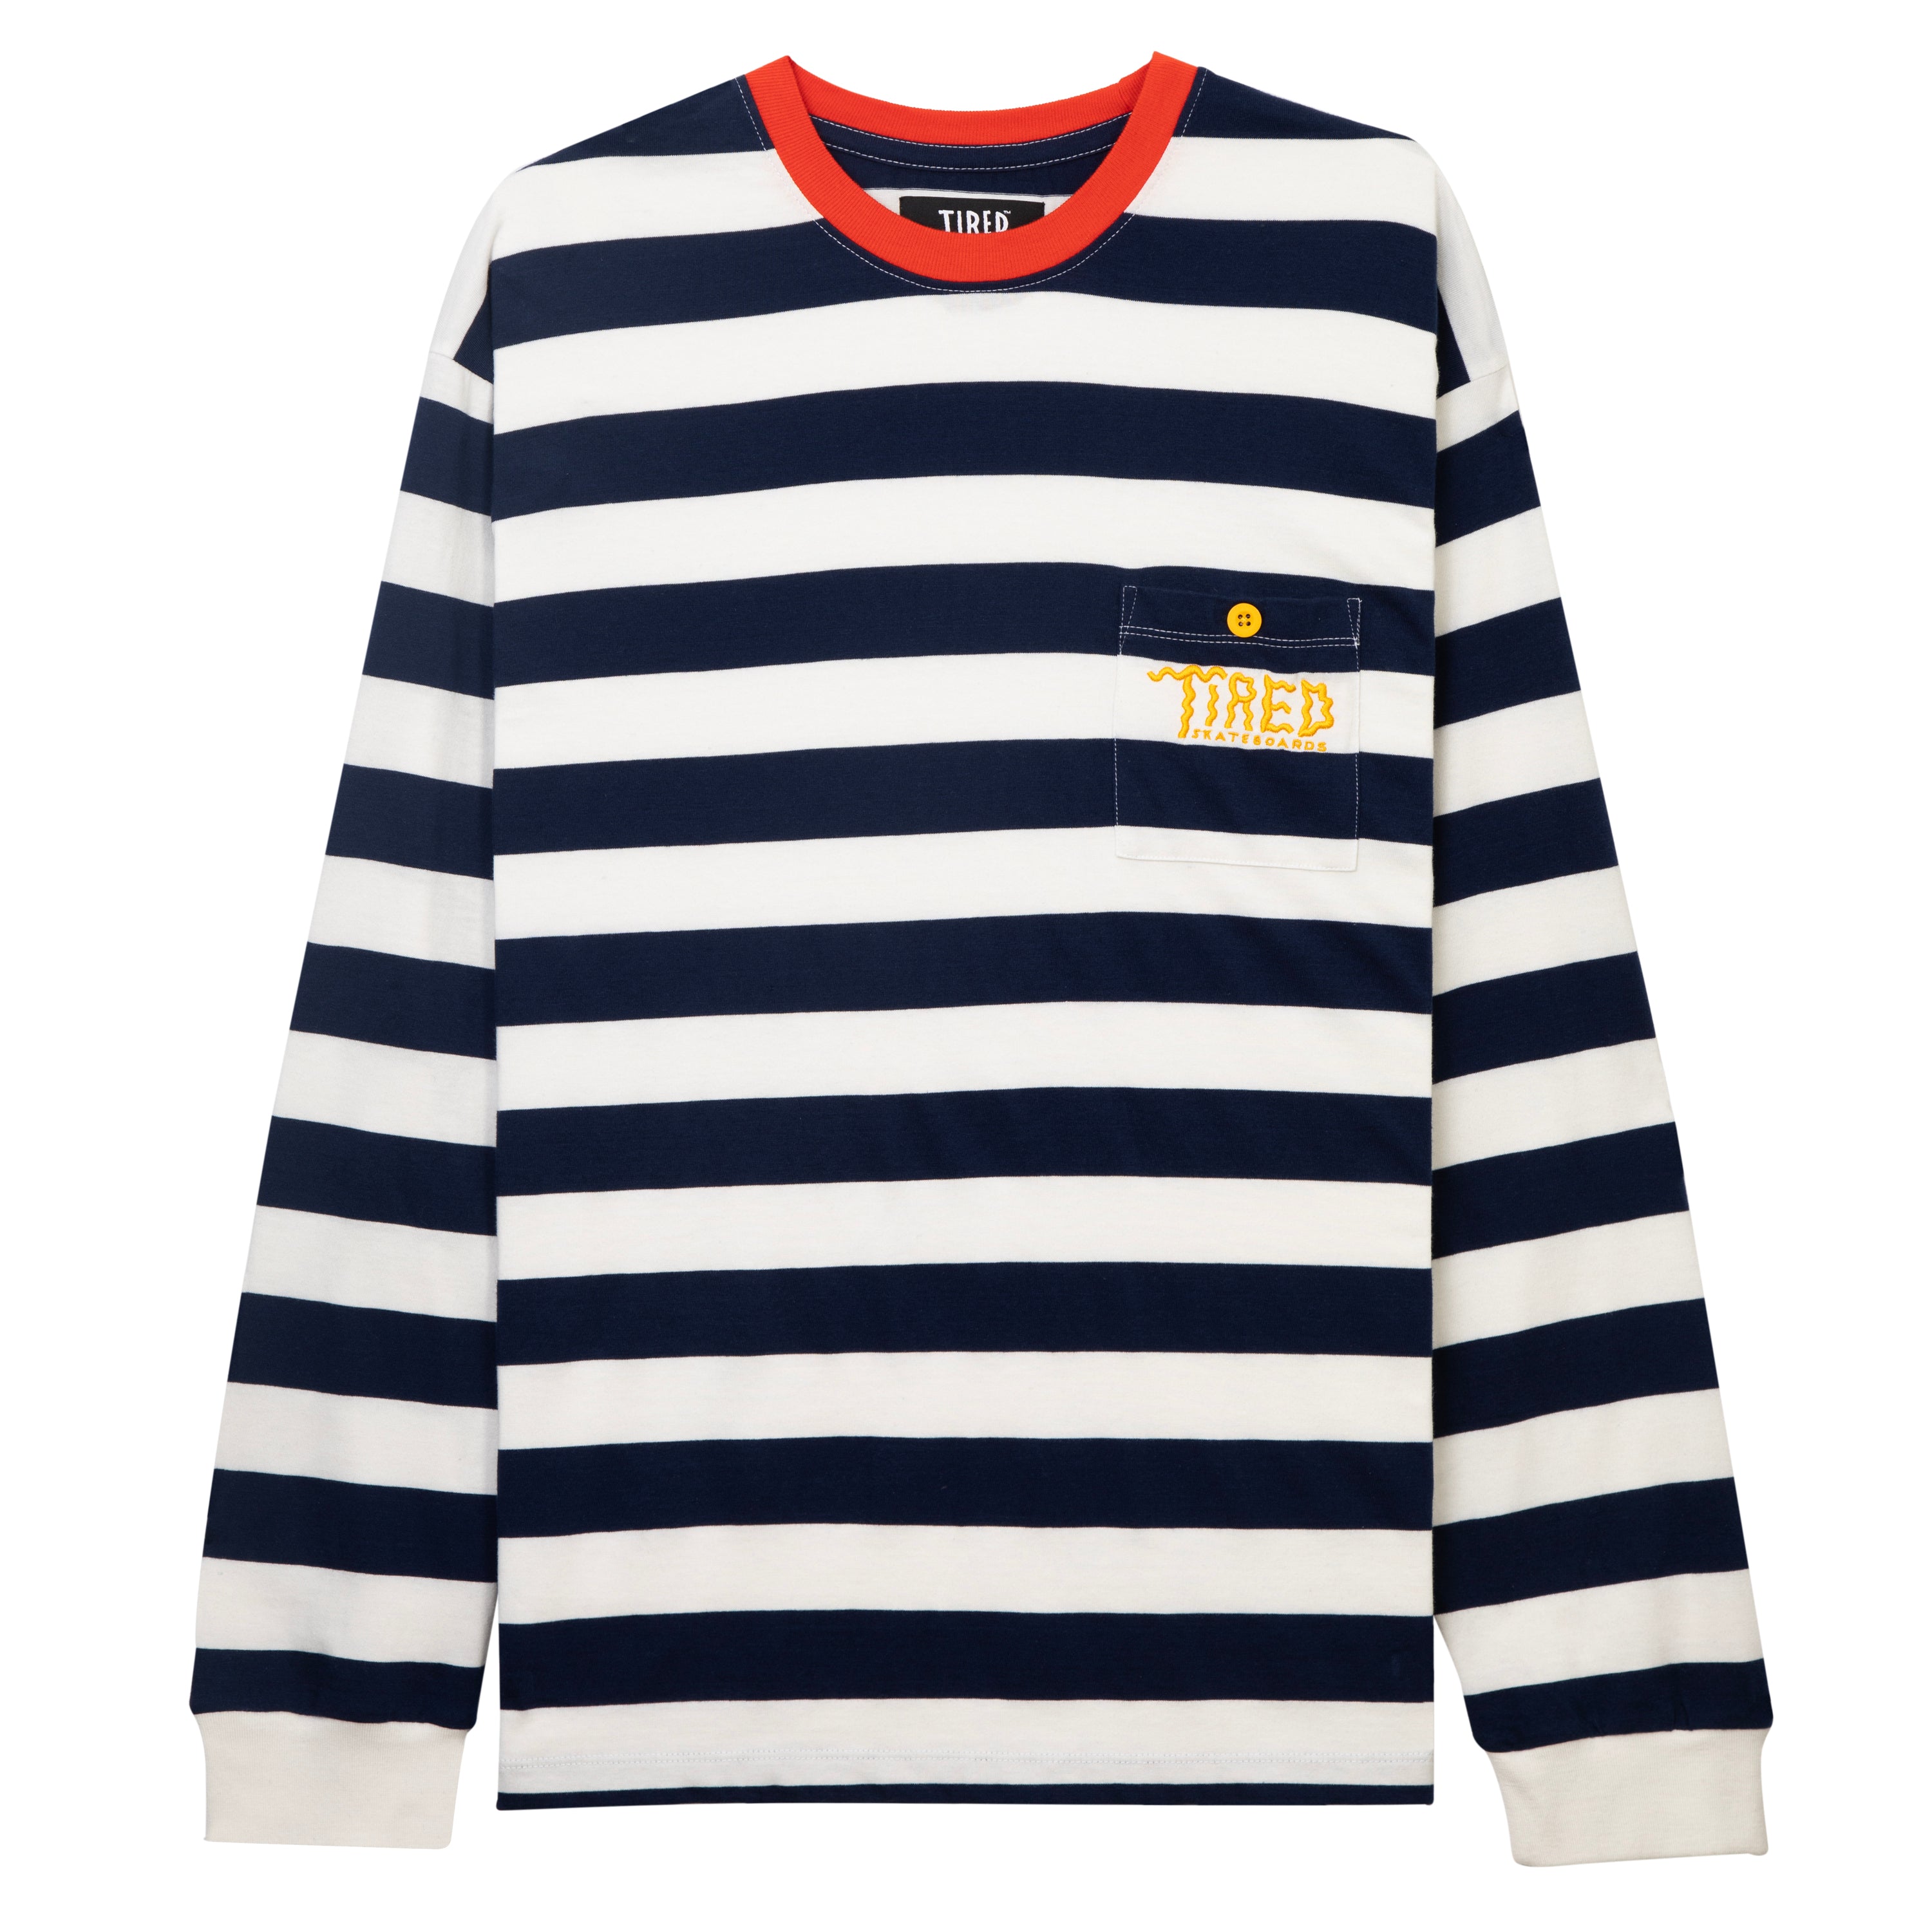 Tired Skateboards Squiggly Logo Striped Pocket LS - Red / Navy